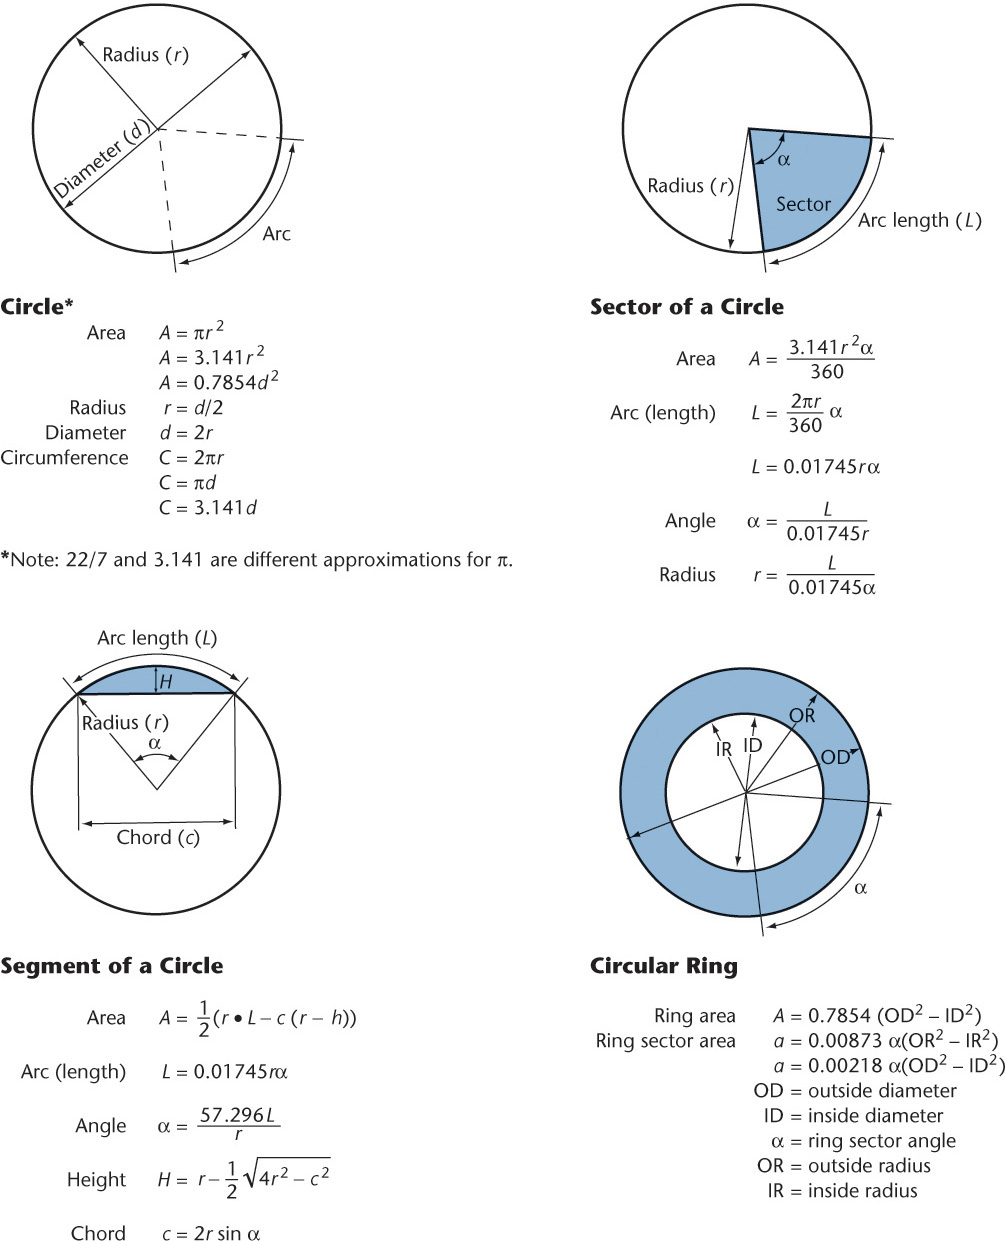 Figure shows the different formulae associated with circles.